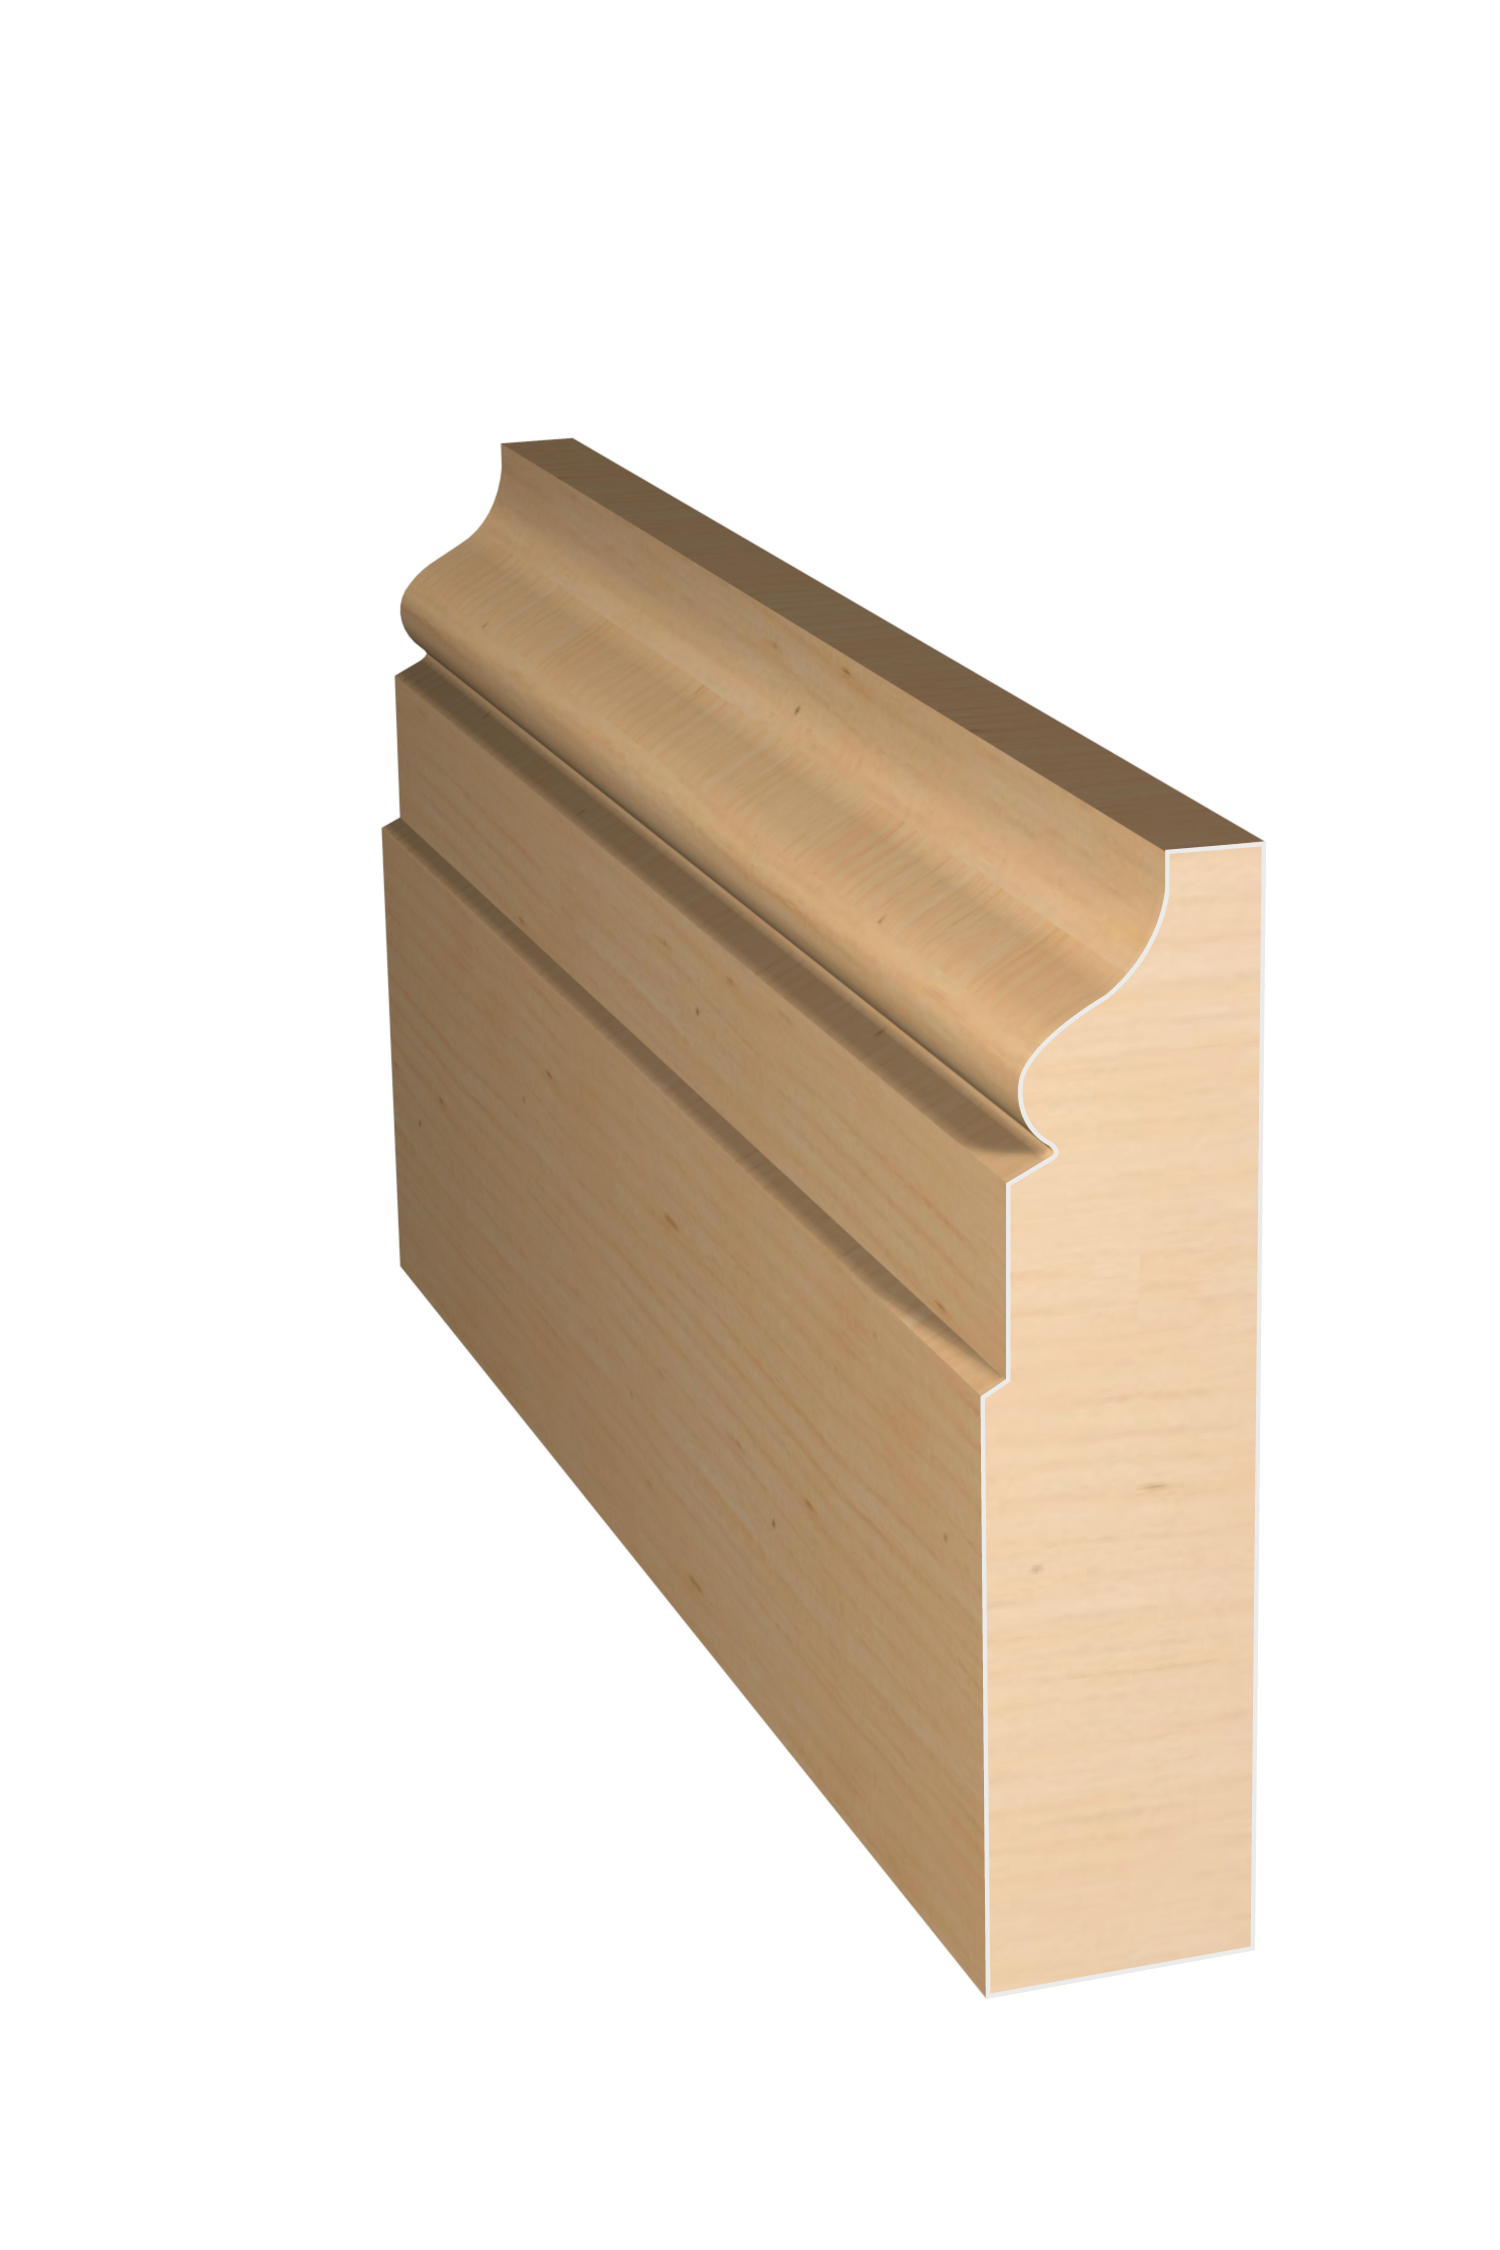 Three dimensional rendering of custom casing wood molding CAPL325 made by Public Lumber Company in Detroit.